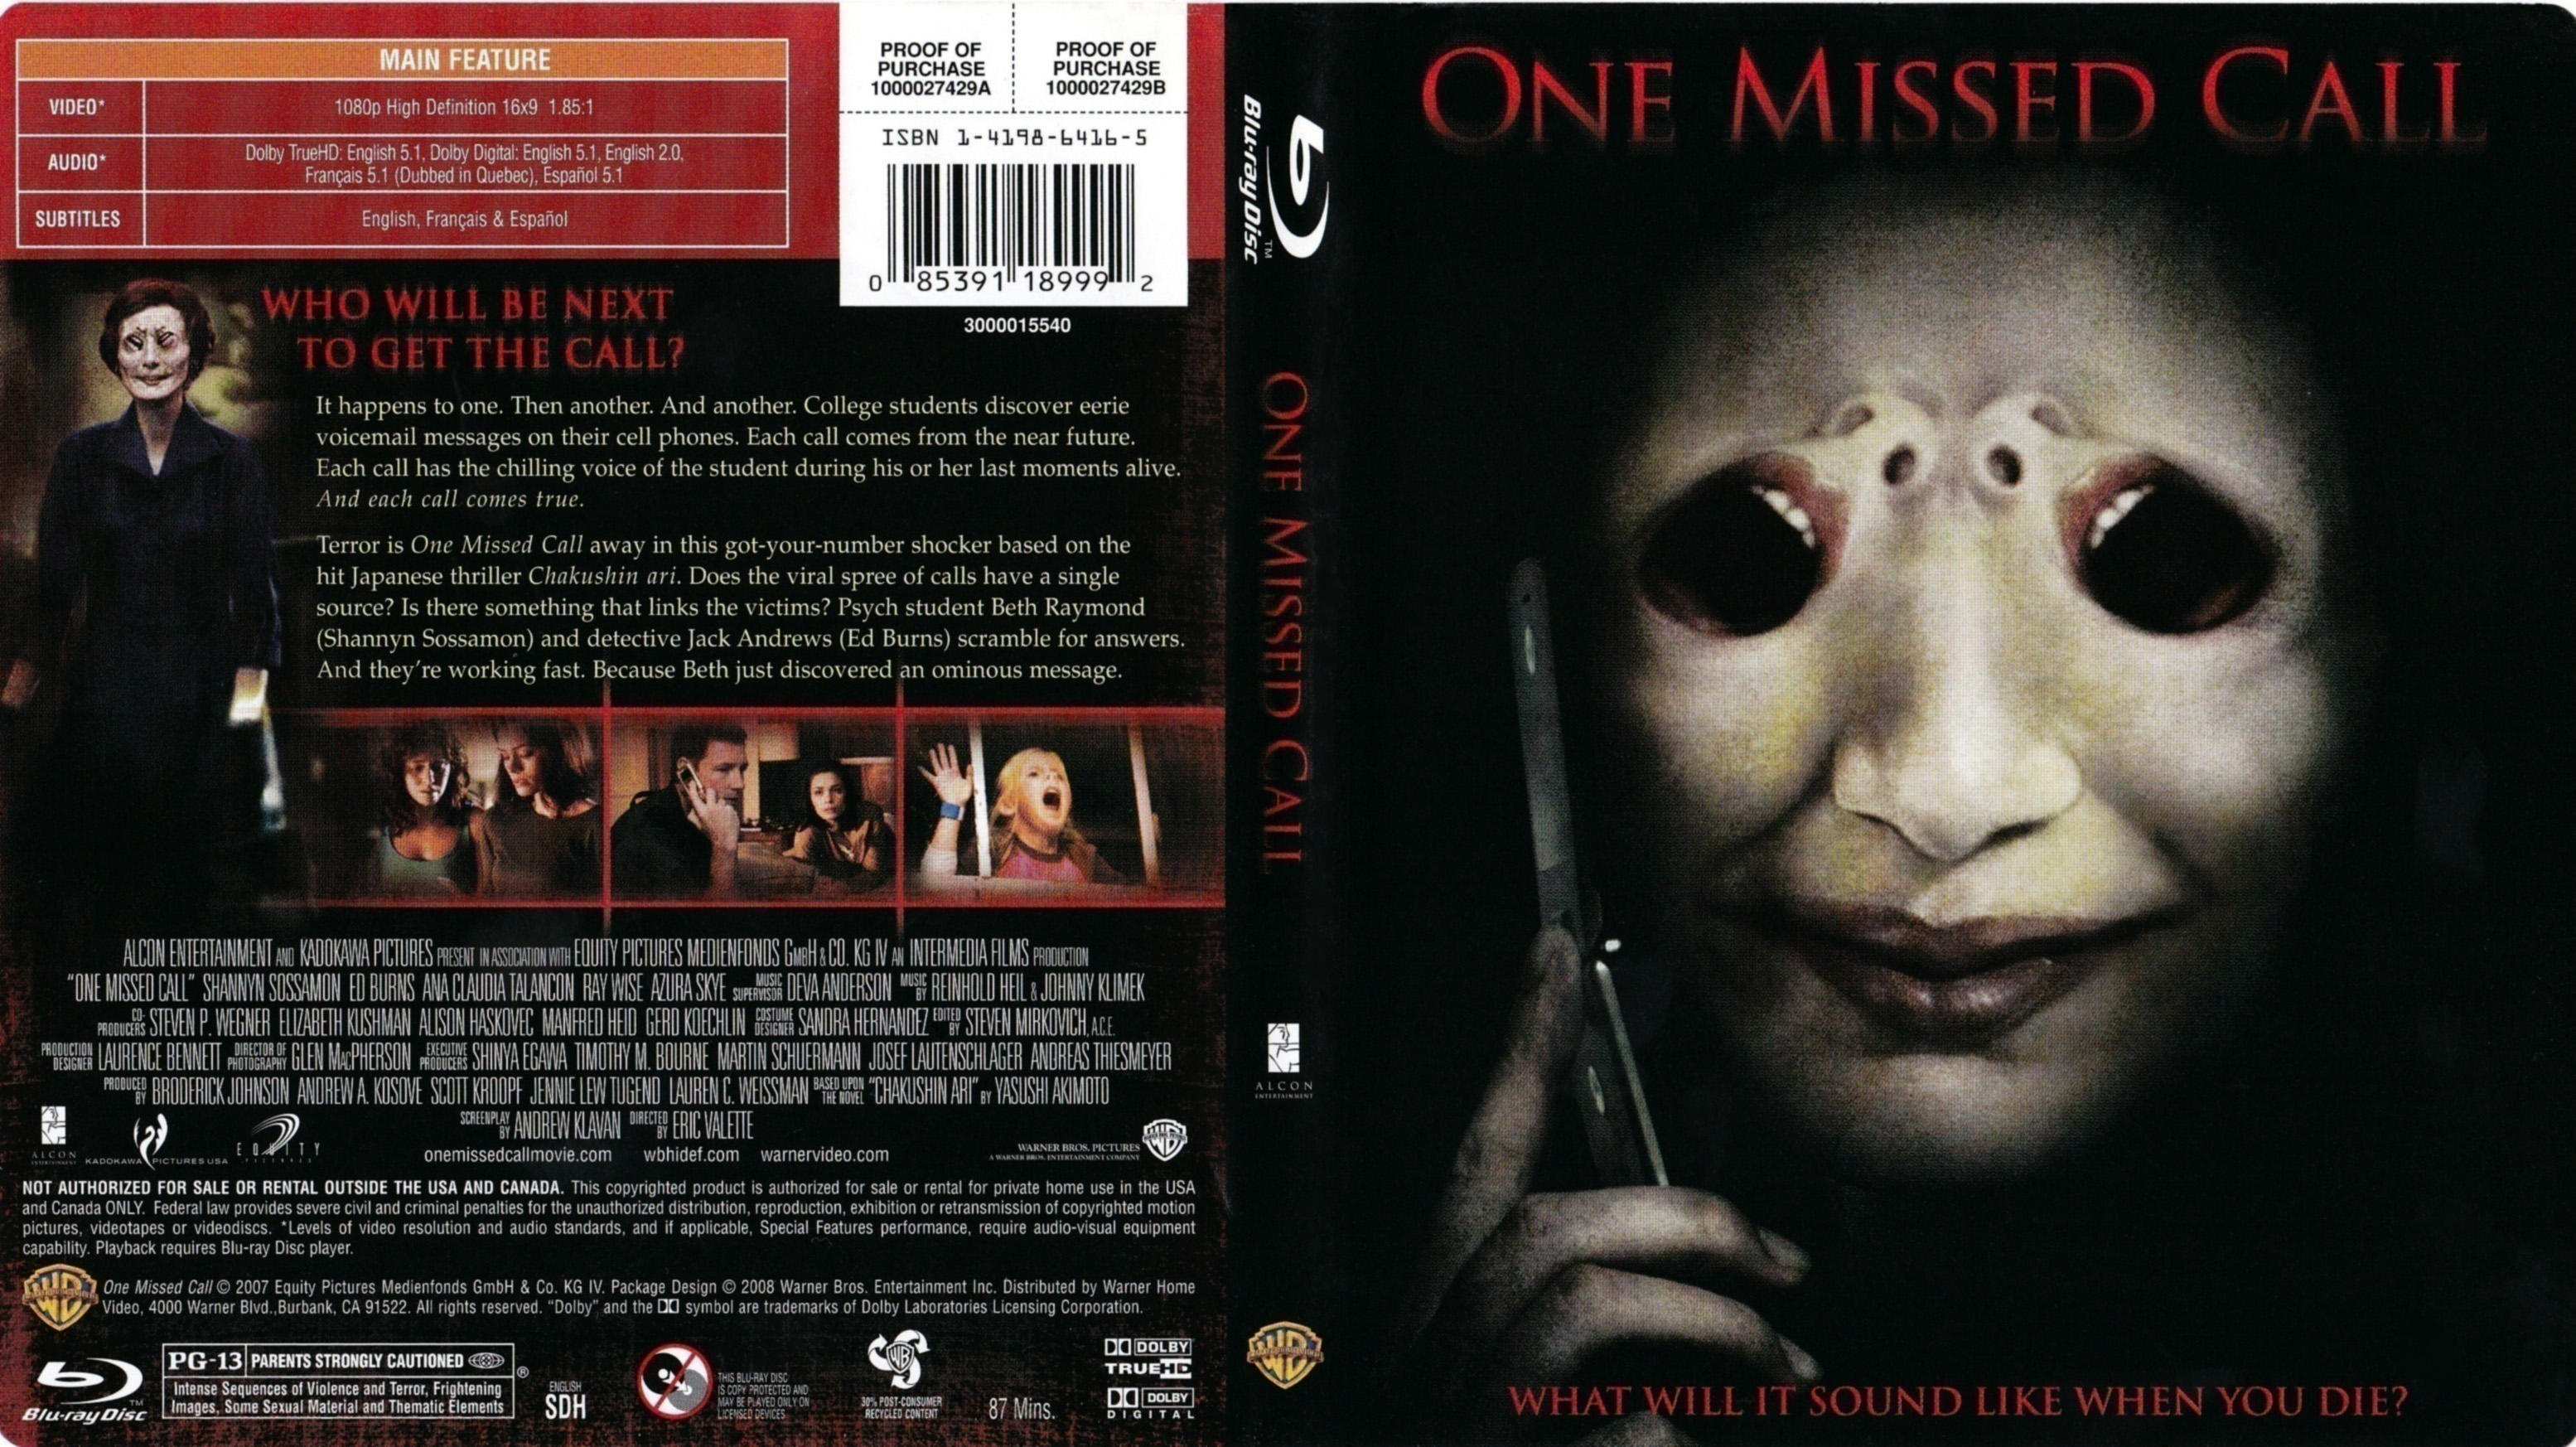 Jaquette DVD One Missed Call (BLU-RAY)